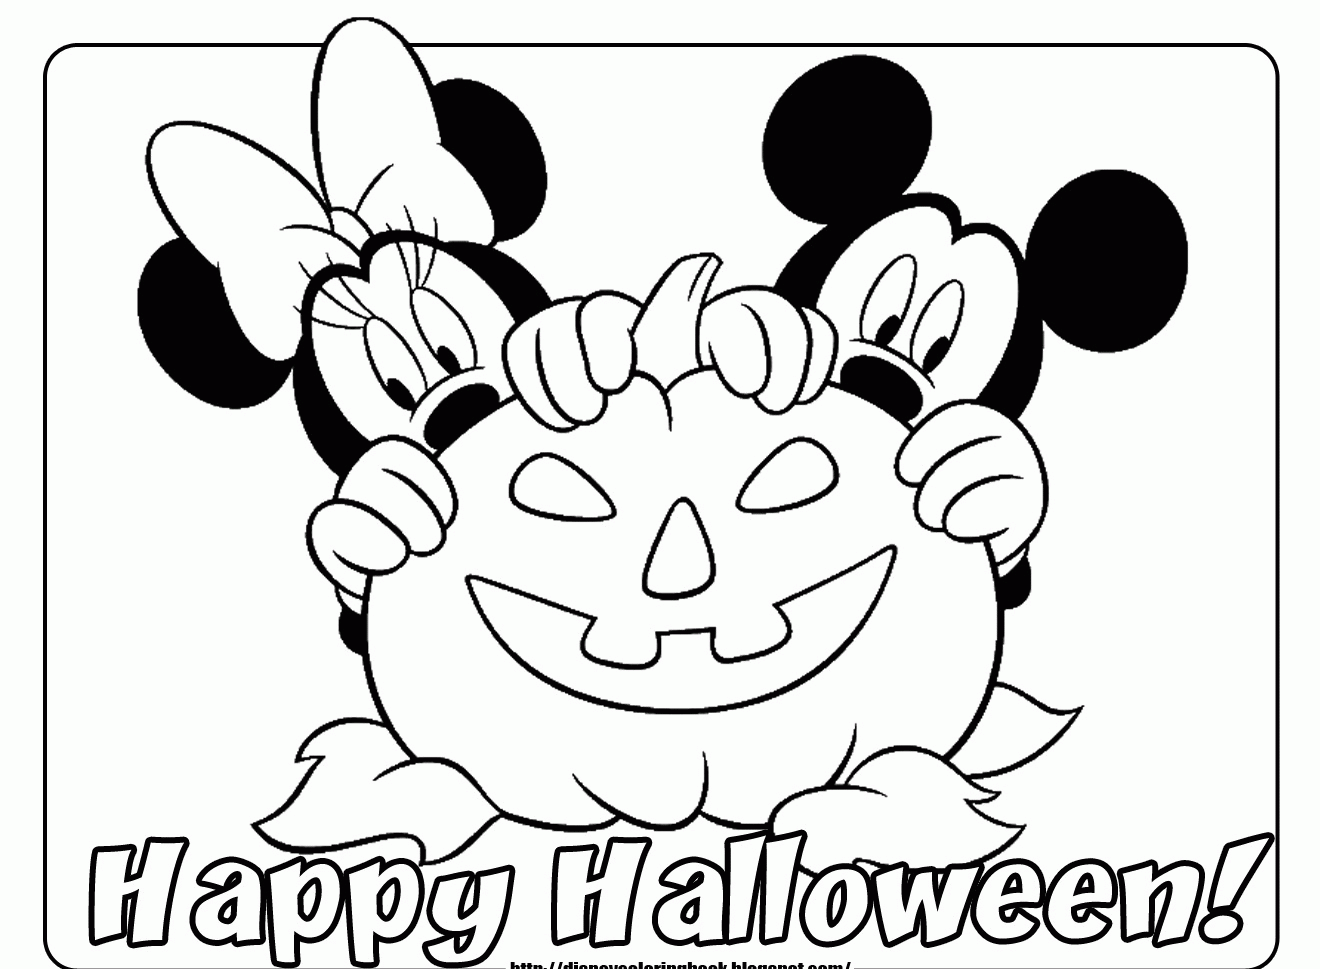 18 Free Pictures for: Halloween Color Pages Printable. Temoon.us